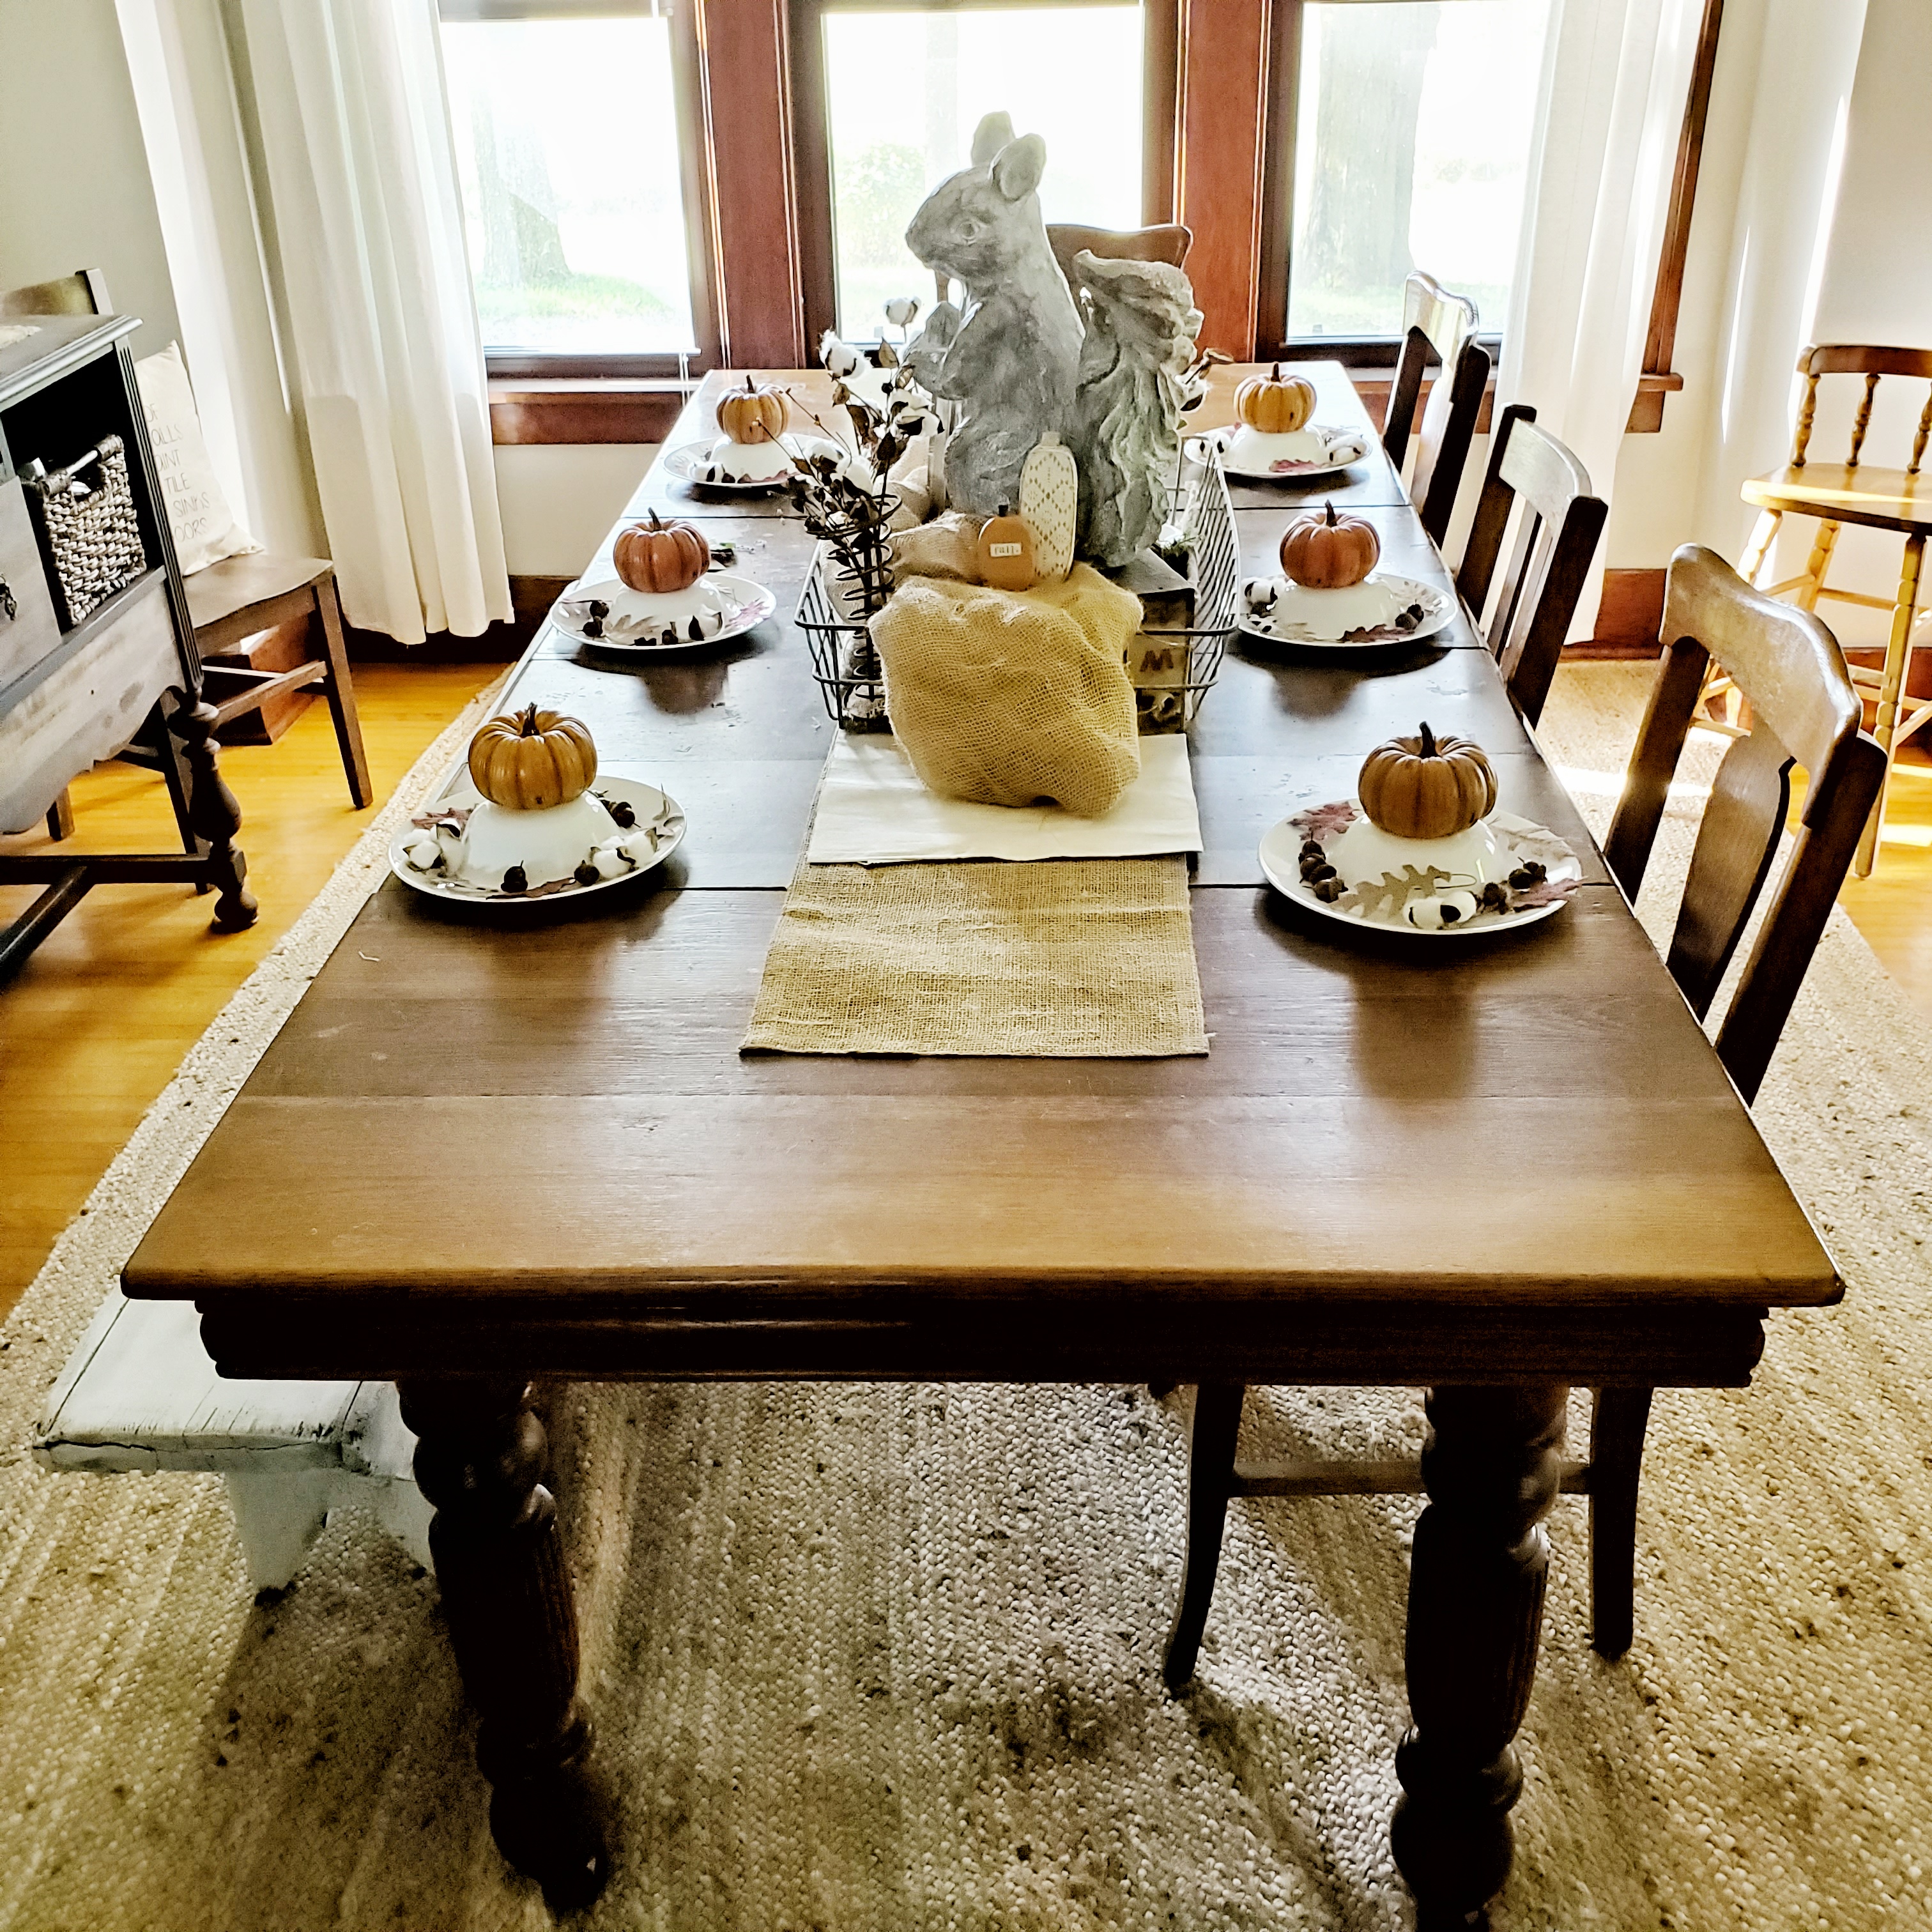 Having a large farmhouse table leaves room for plenty of fall decor and accessories.